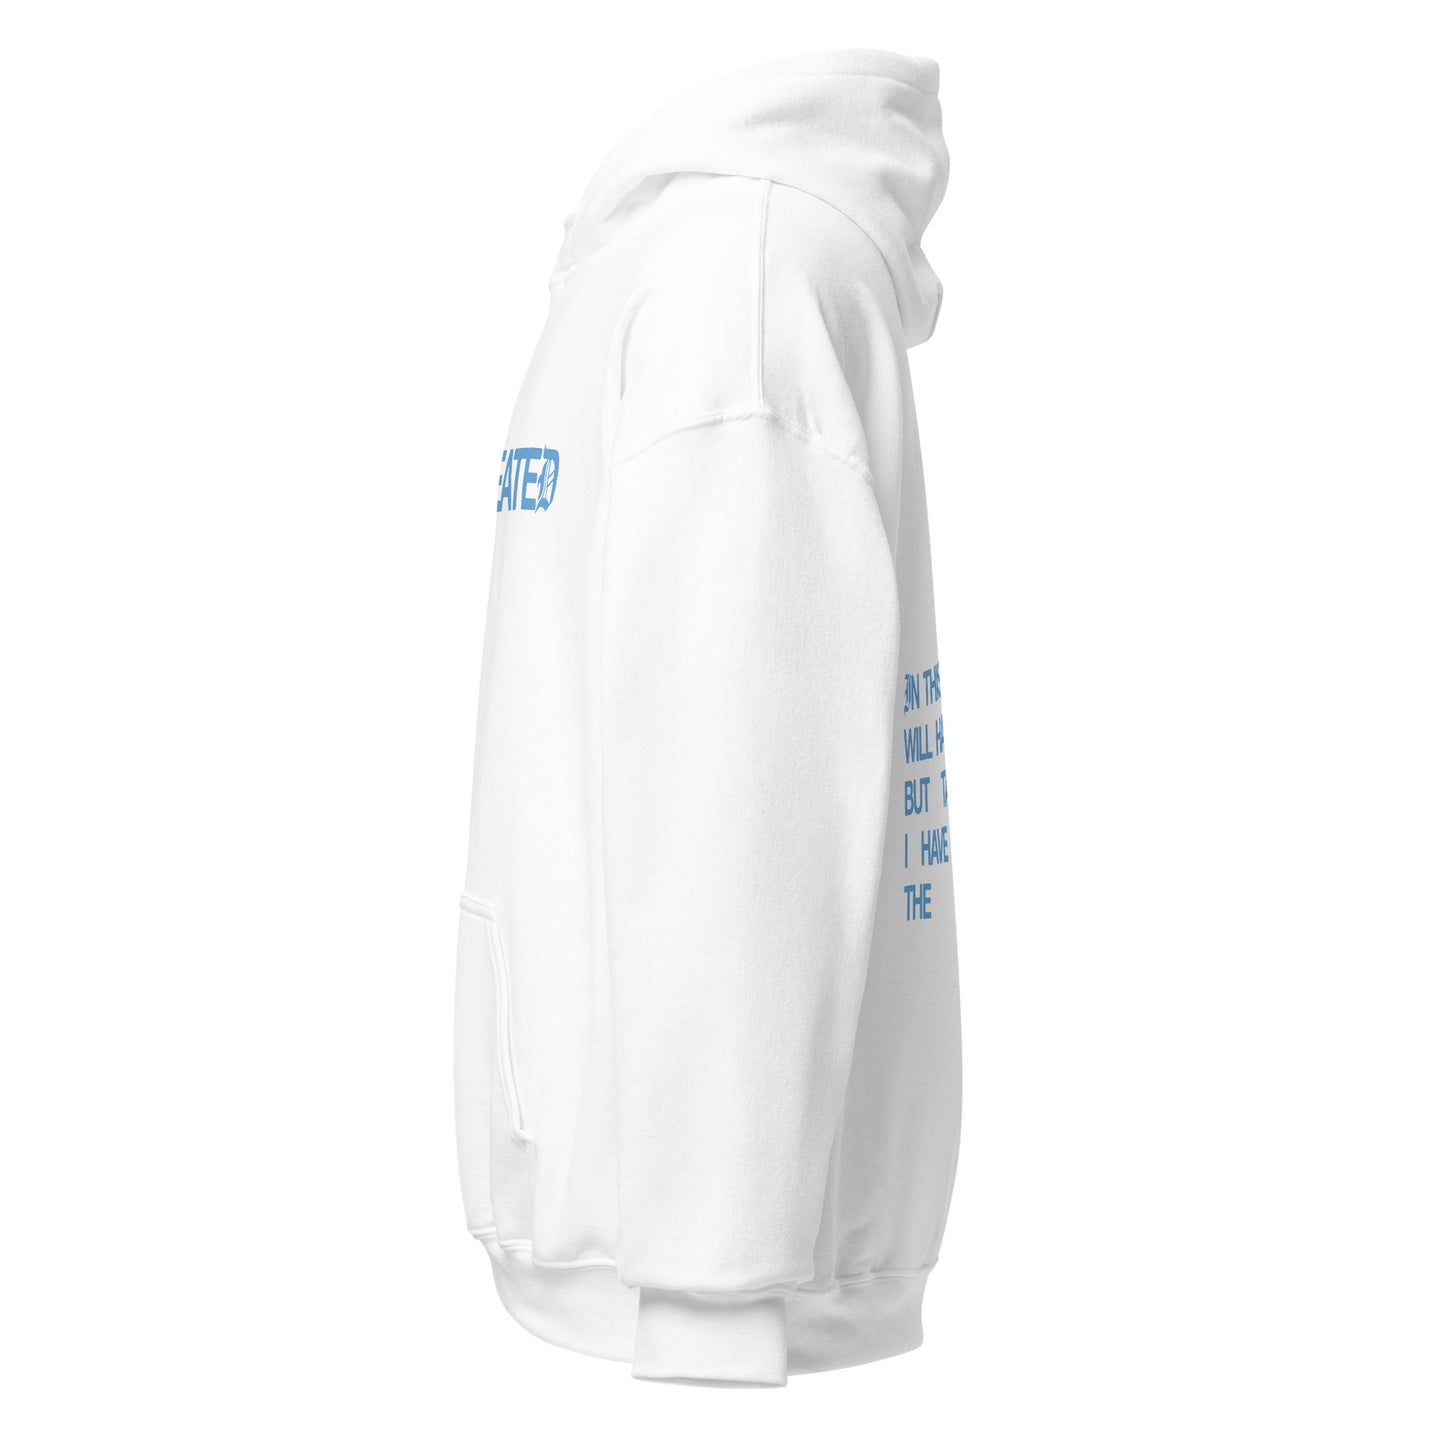 Freedom Undefeated Hoodie